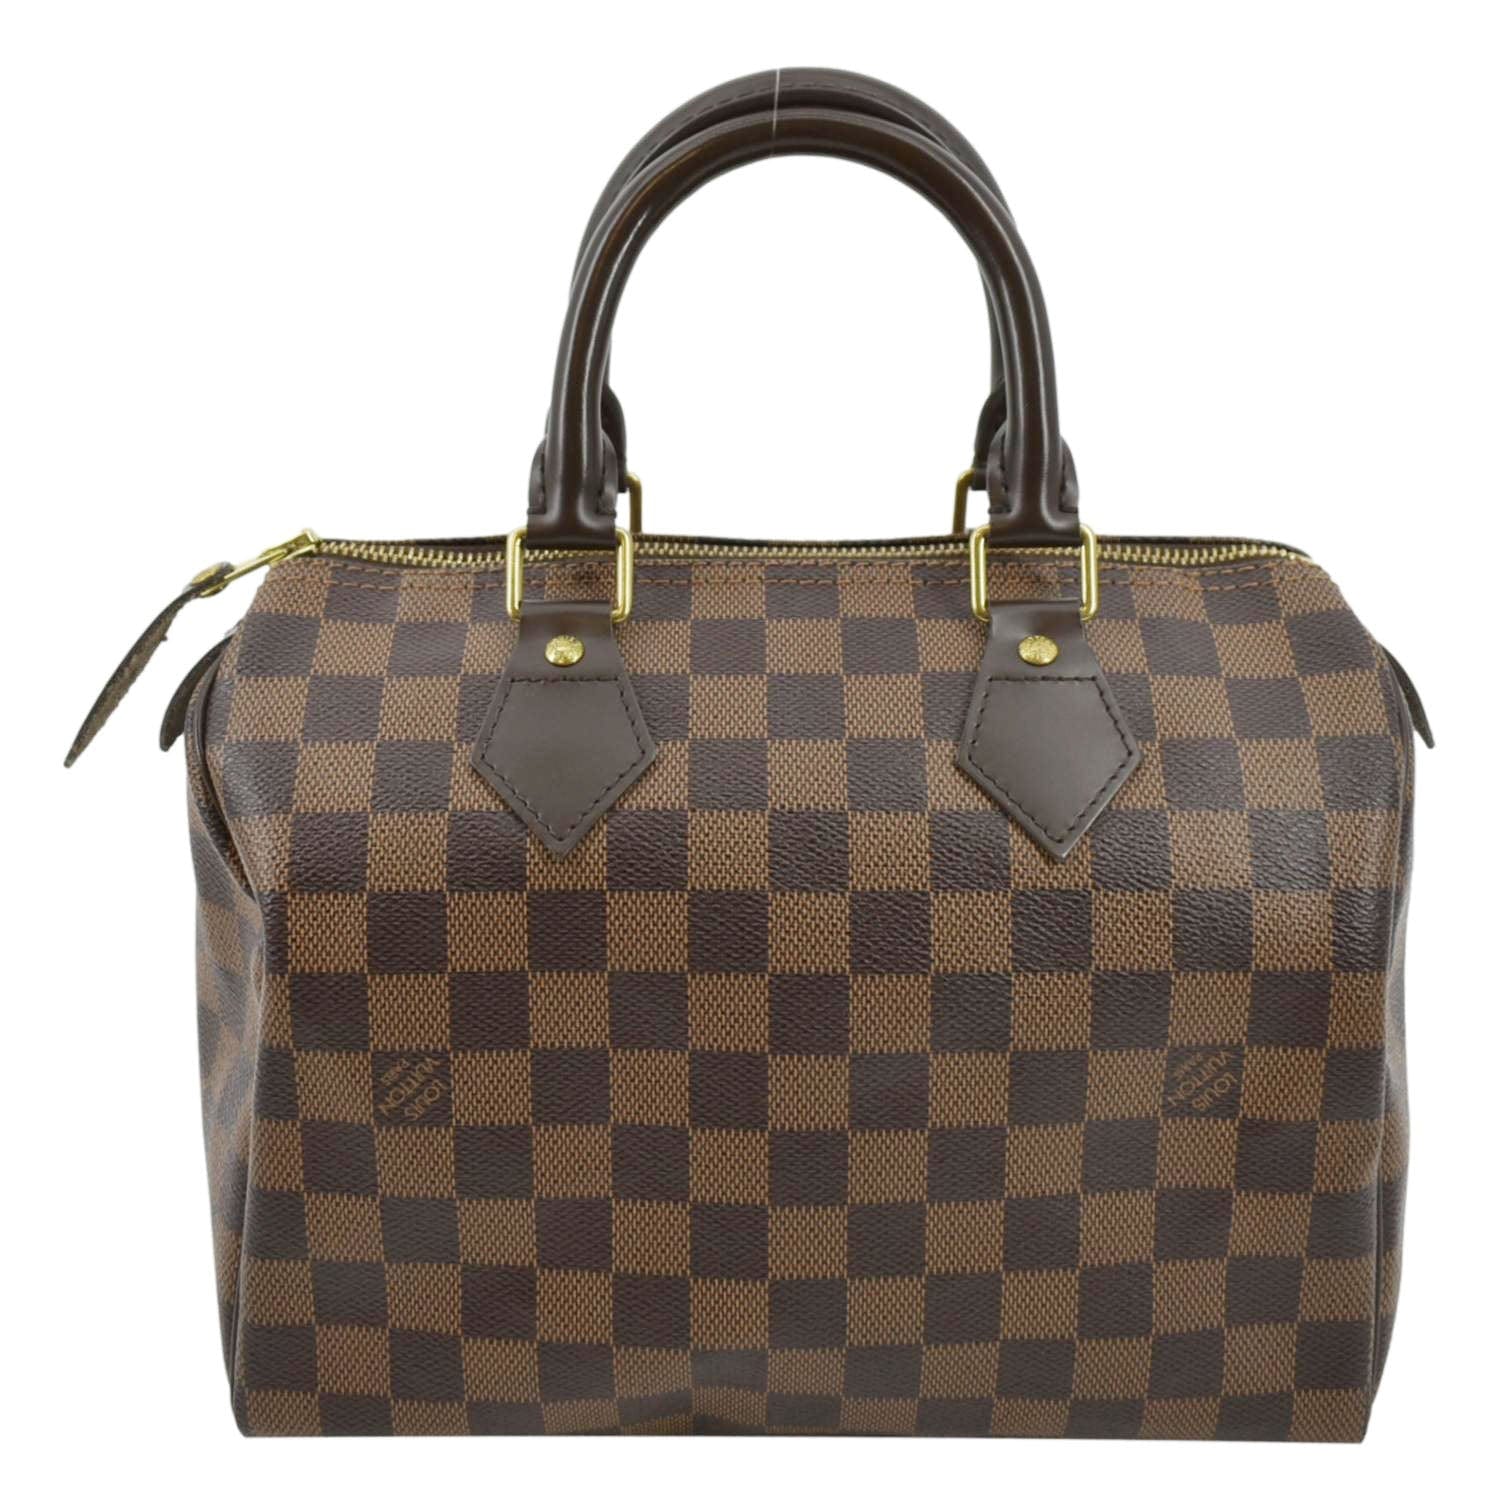 Your daily dose of elegance: the Louis Vuitton Damier Ebene Speedy